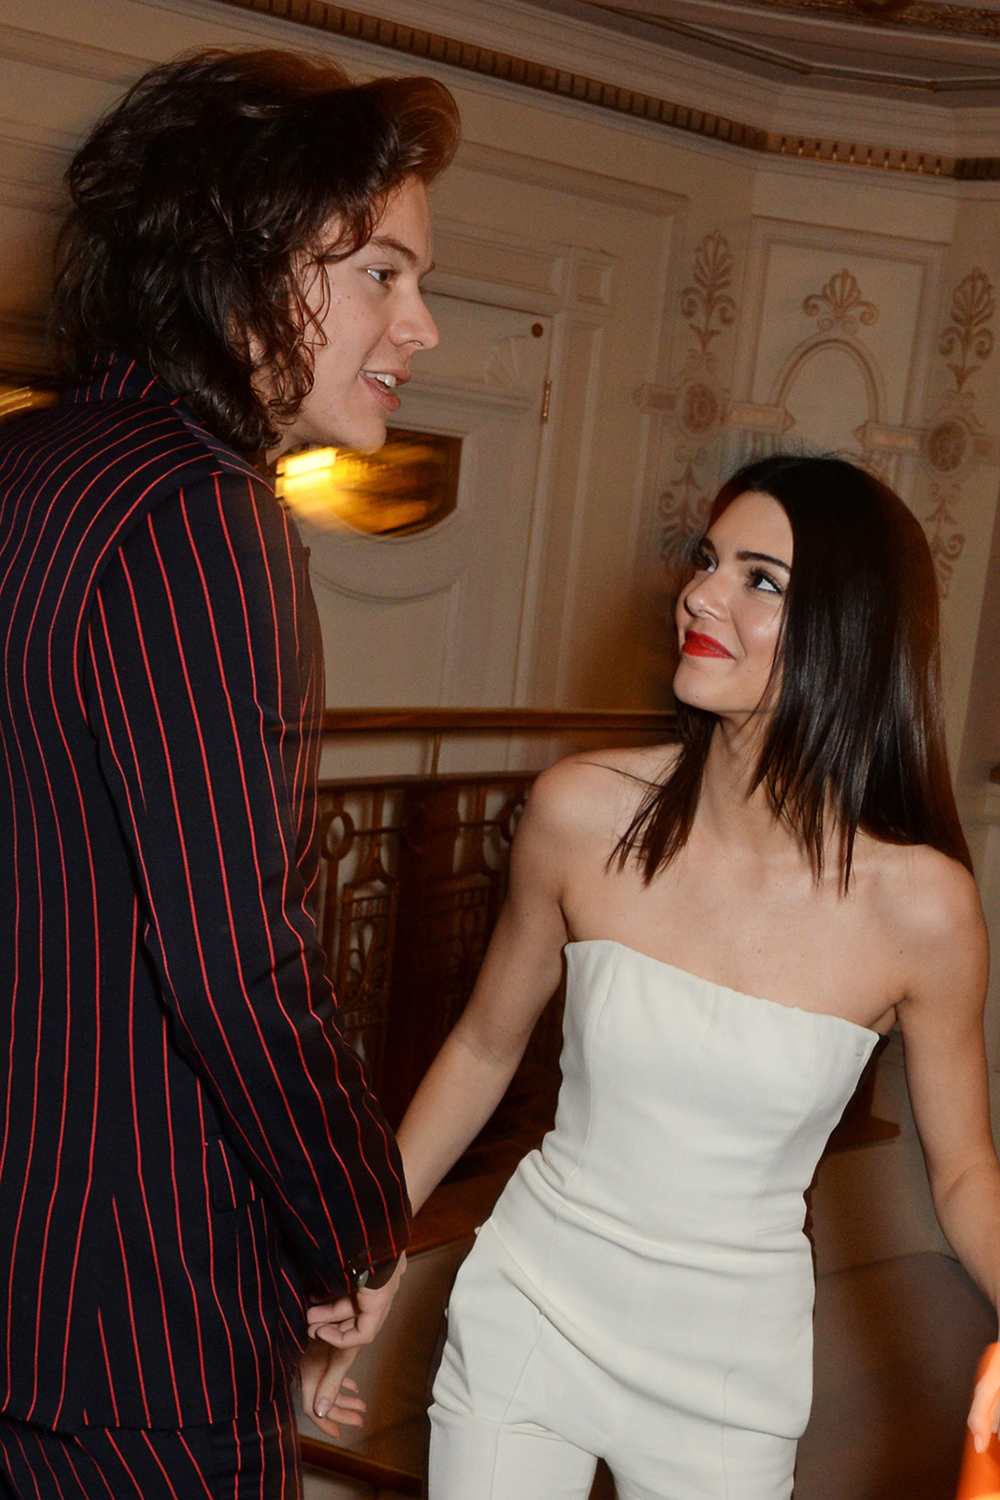 Harry Styles and Kendall Jenner enjoyed a brief fling in 2013 just as Kendall began her rise to supermodel stardom. The couple were spotted holidaying in the Caribbean over the New Year, however the fleeting romance didn't last. But it looks like third time's a charm for the model and musician who have reportedly started dating again after being spotted out and about together in LA.